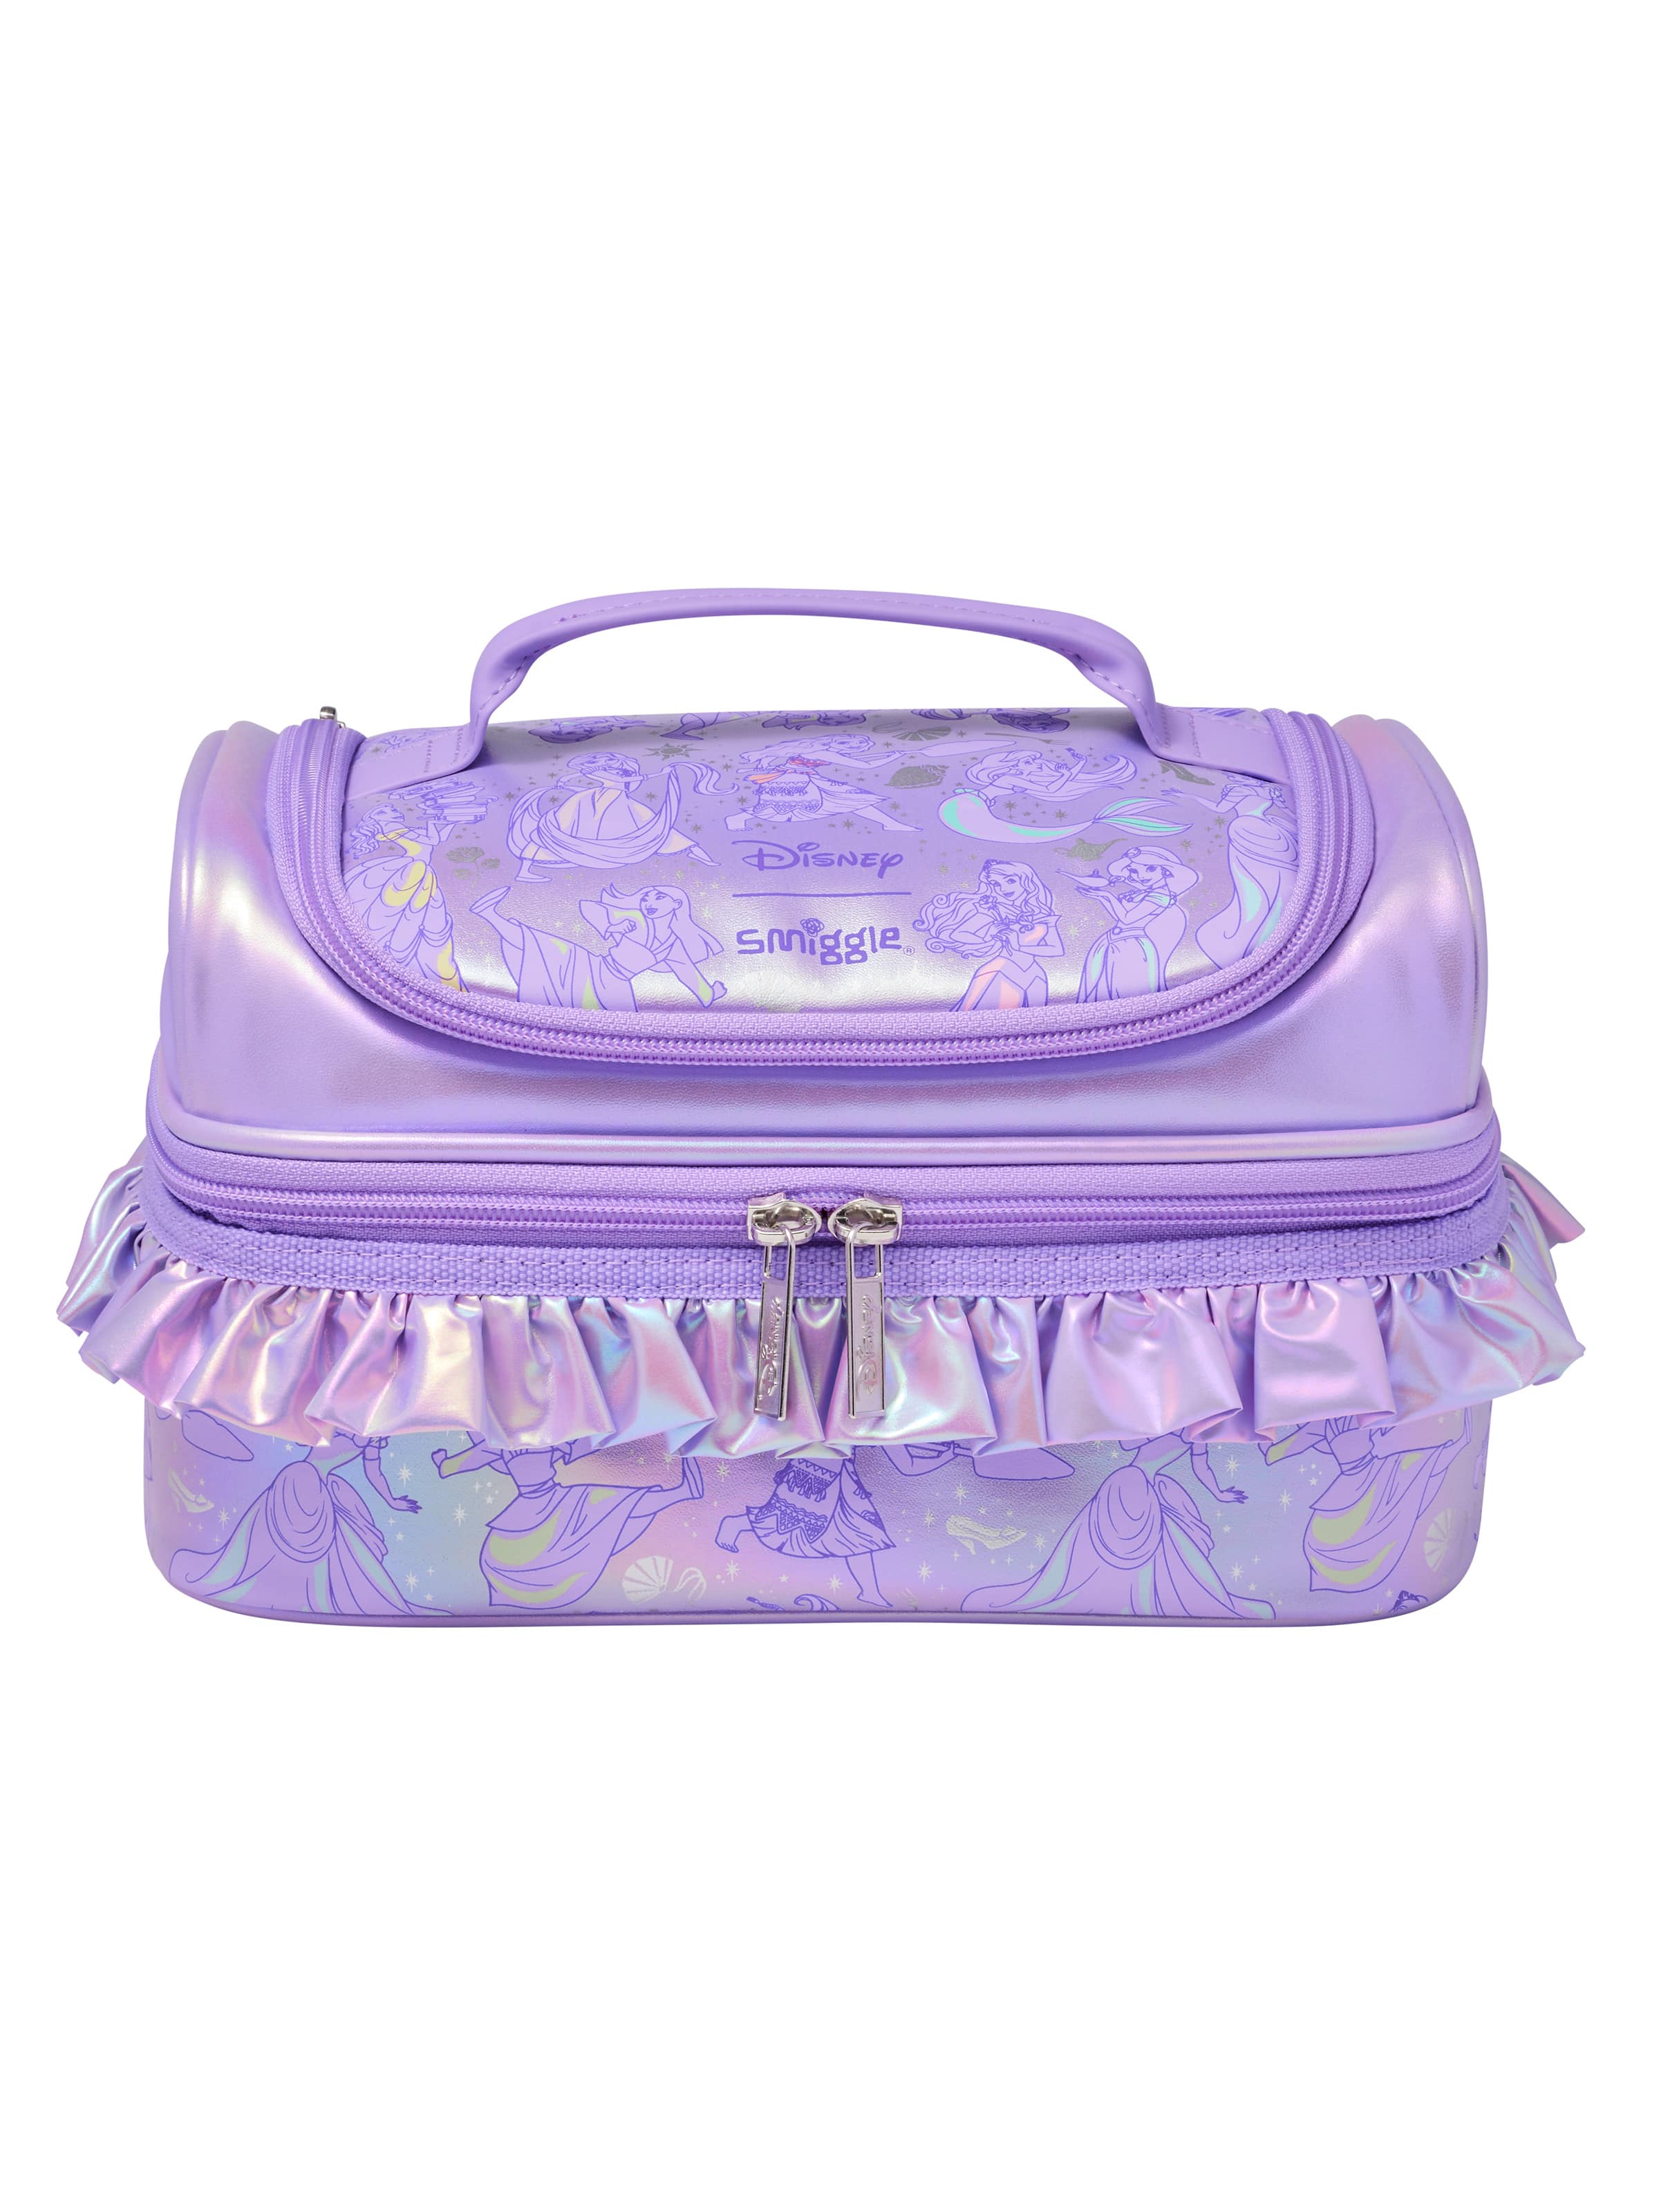 Kids Lunch Boxes - Insulated Lunch Boxes & Lunch Bags